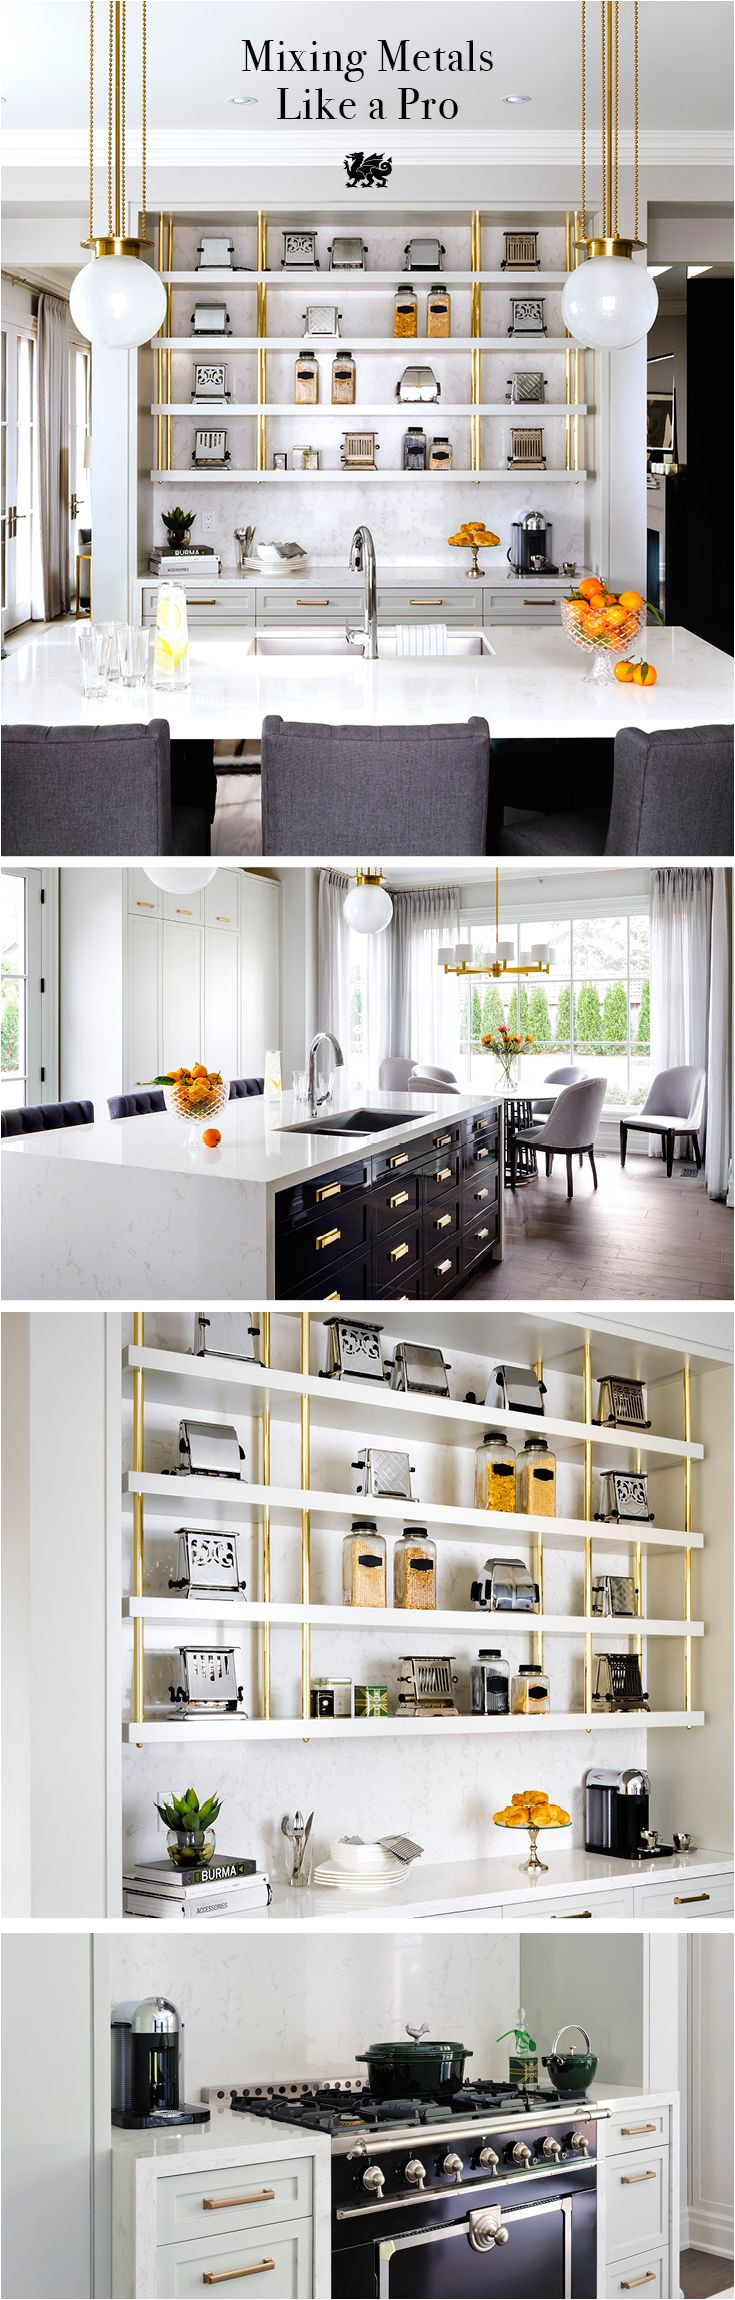 elevate your kitchen space by mixing metals to make a statement use brass lighting and